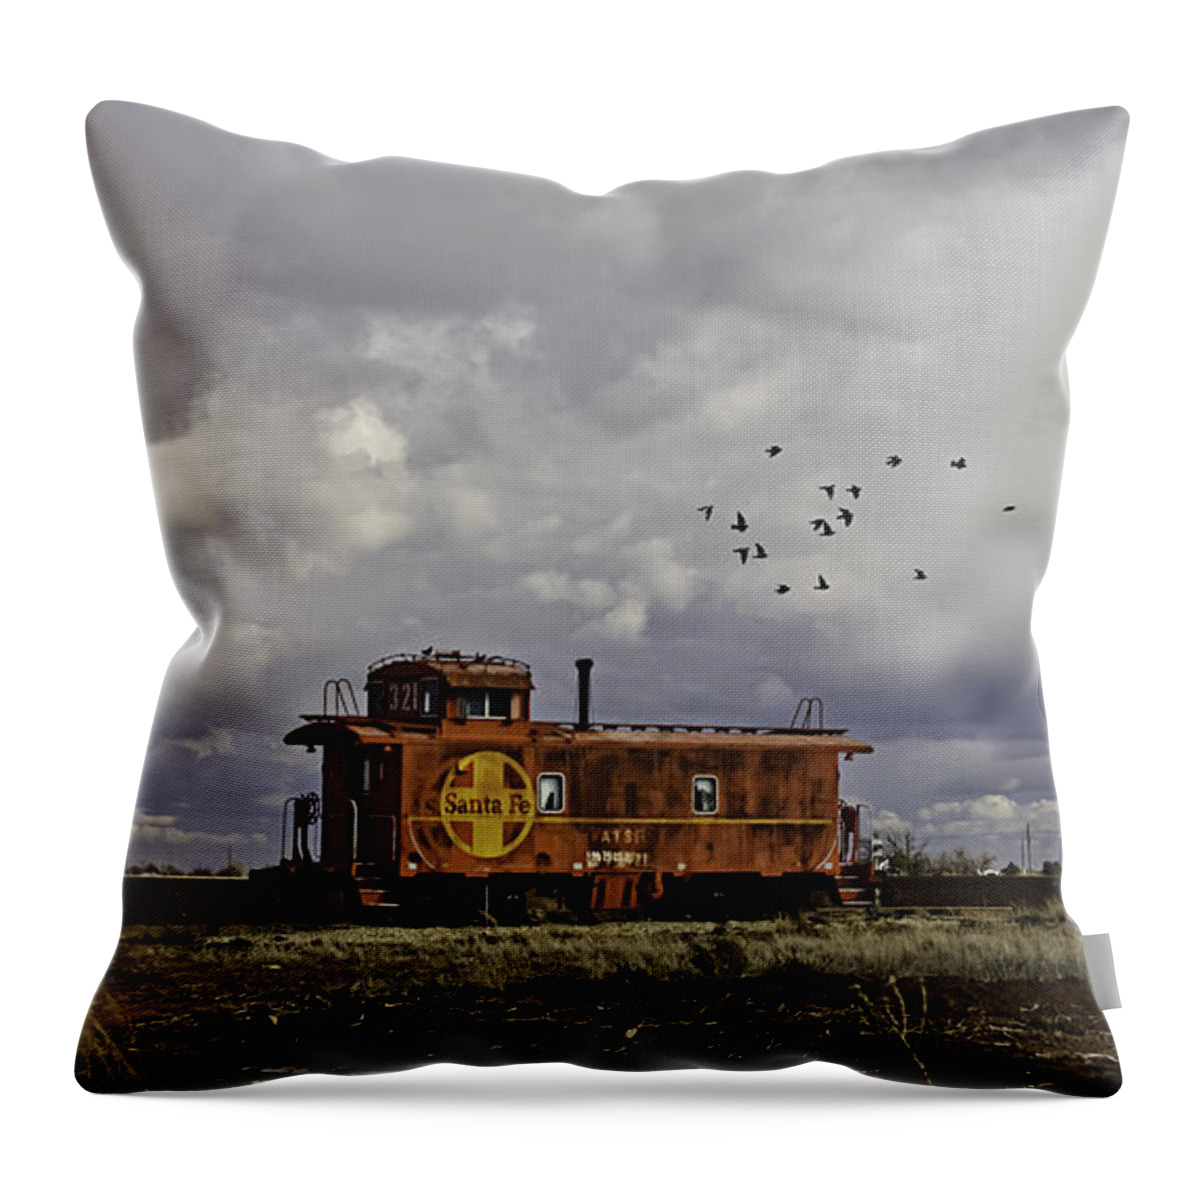 Abandoned Throw Pillow featuring the photograph Caboose in a Cotton Field by Melany Sarafis